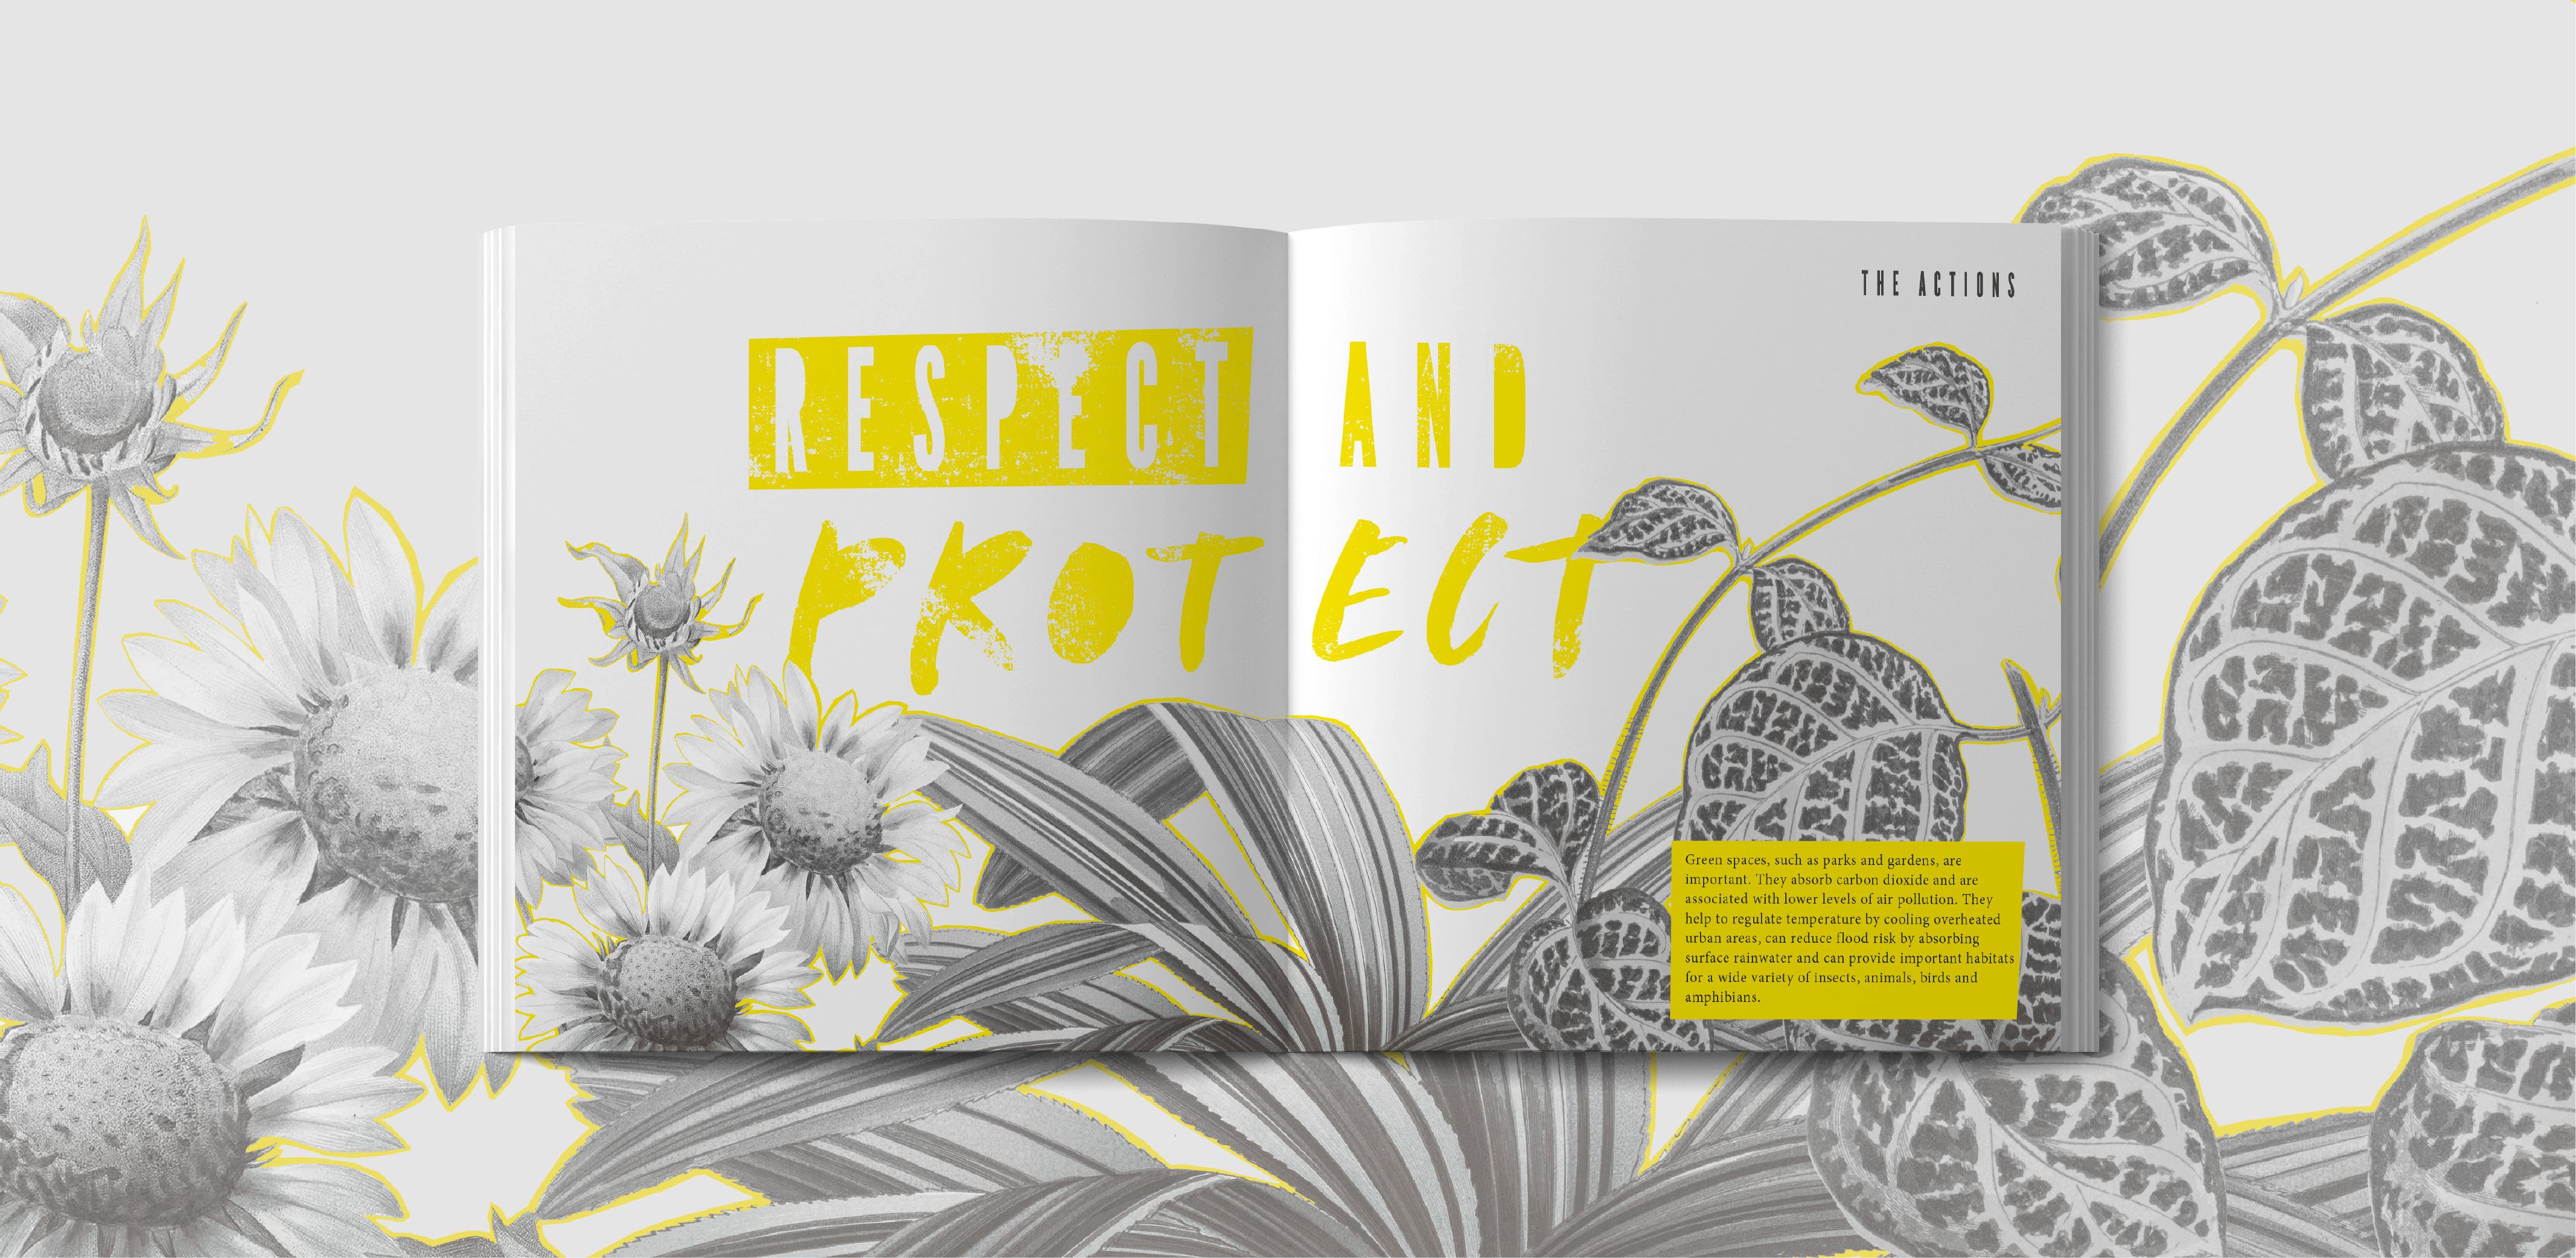 Booklet mock up featuring a typographic design